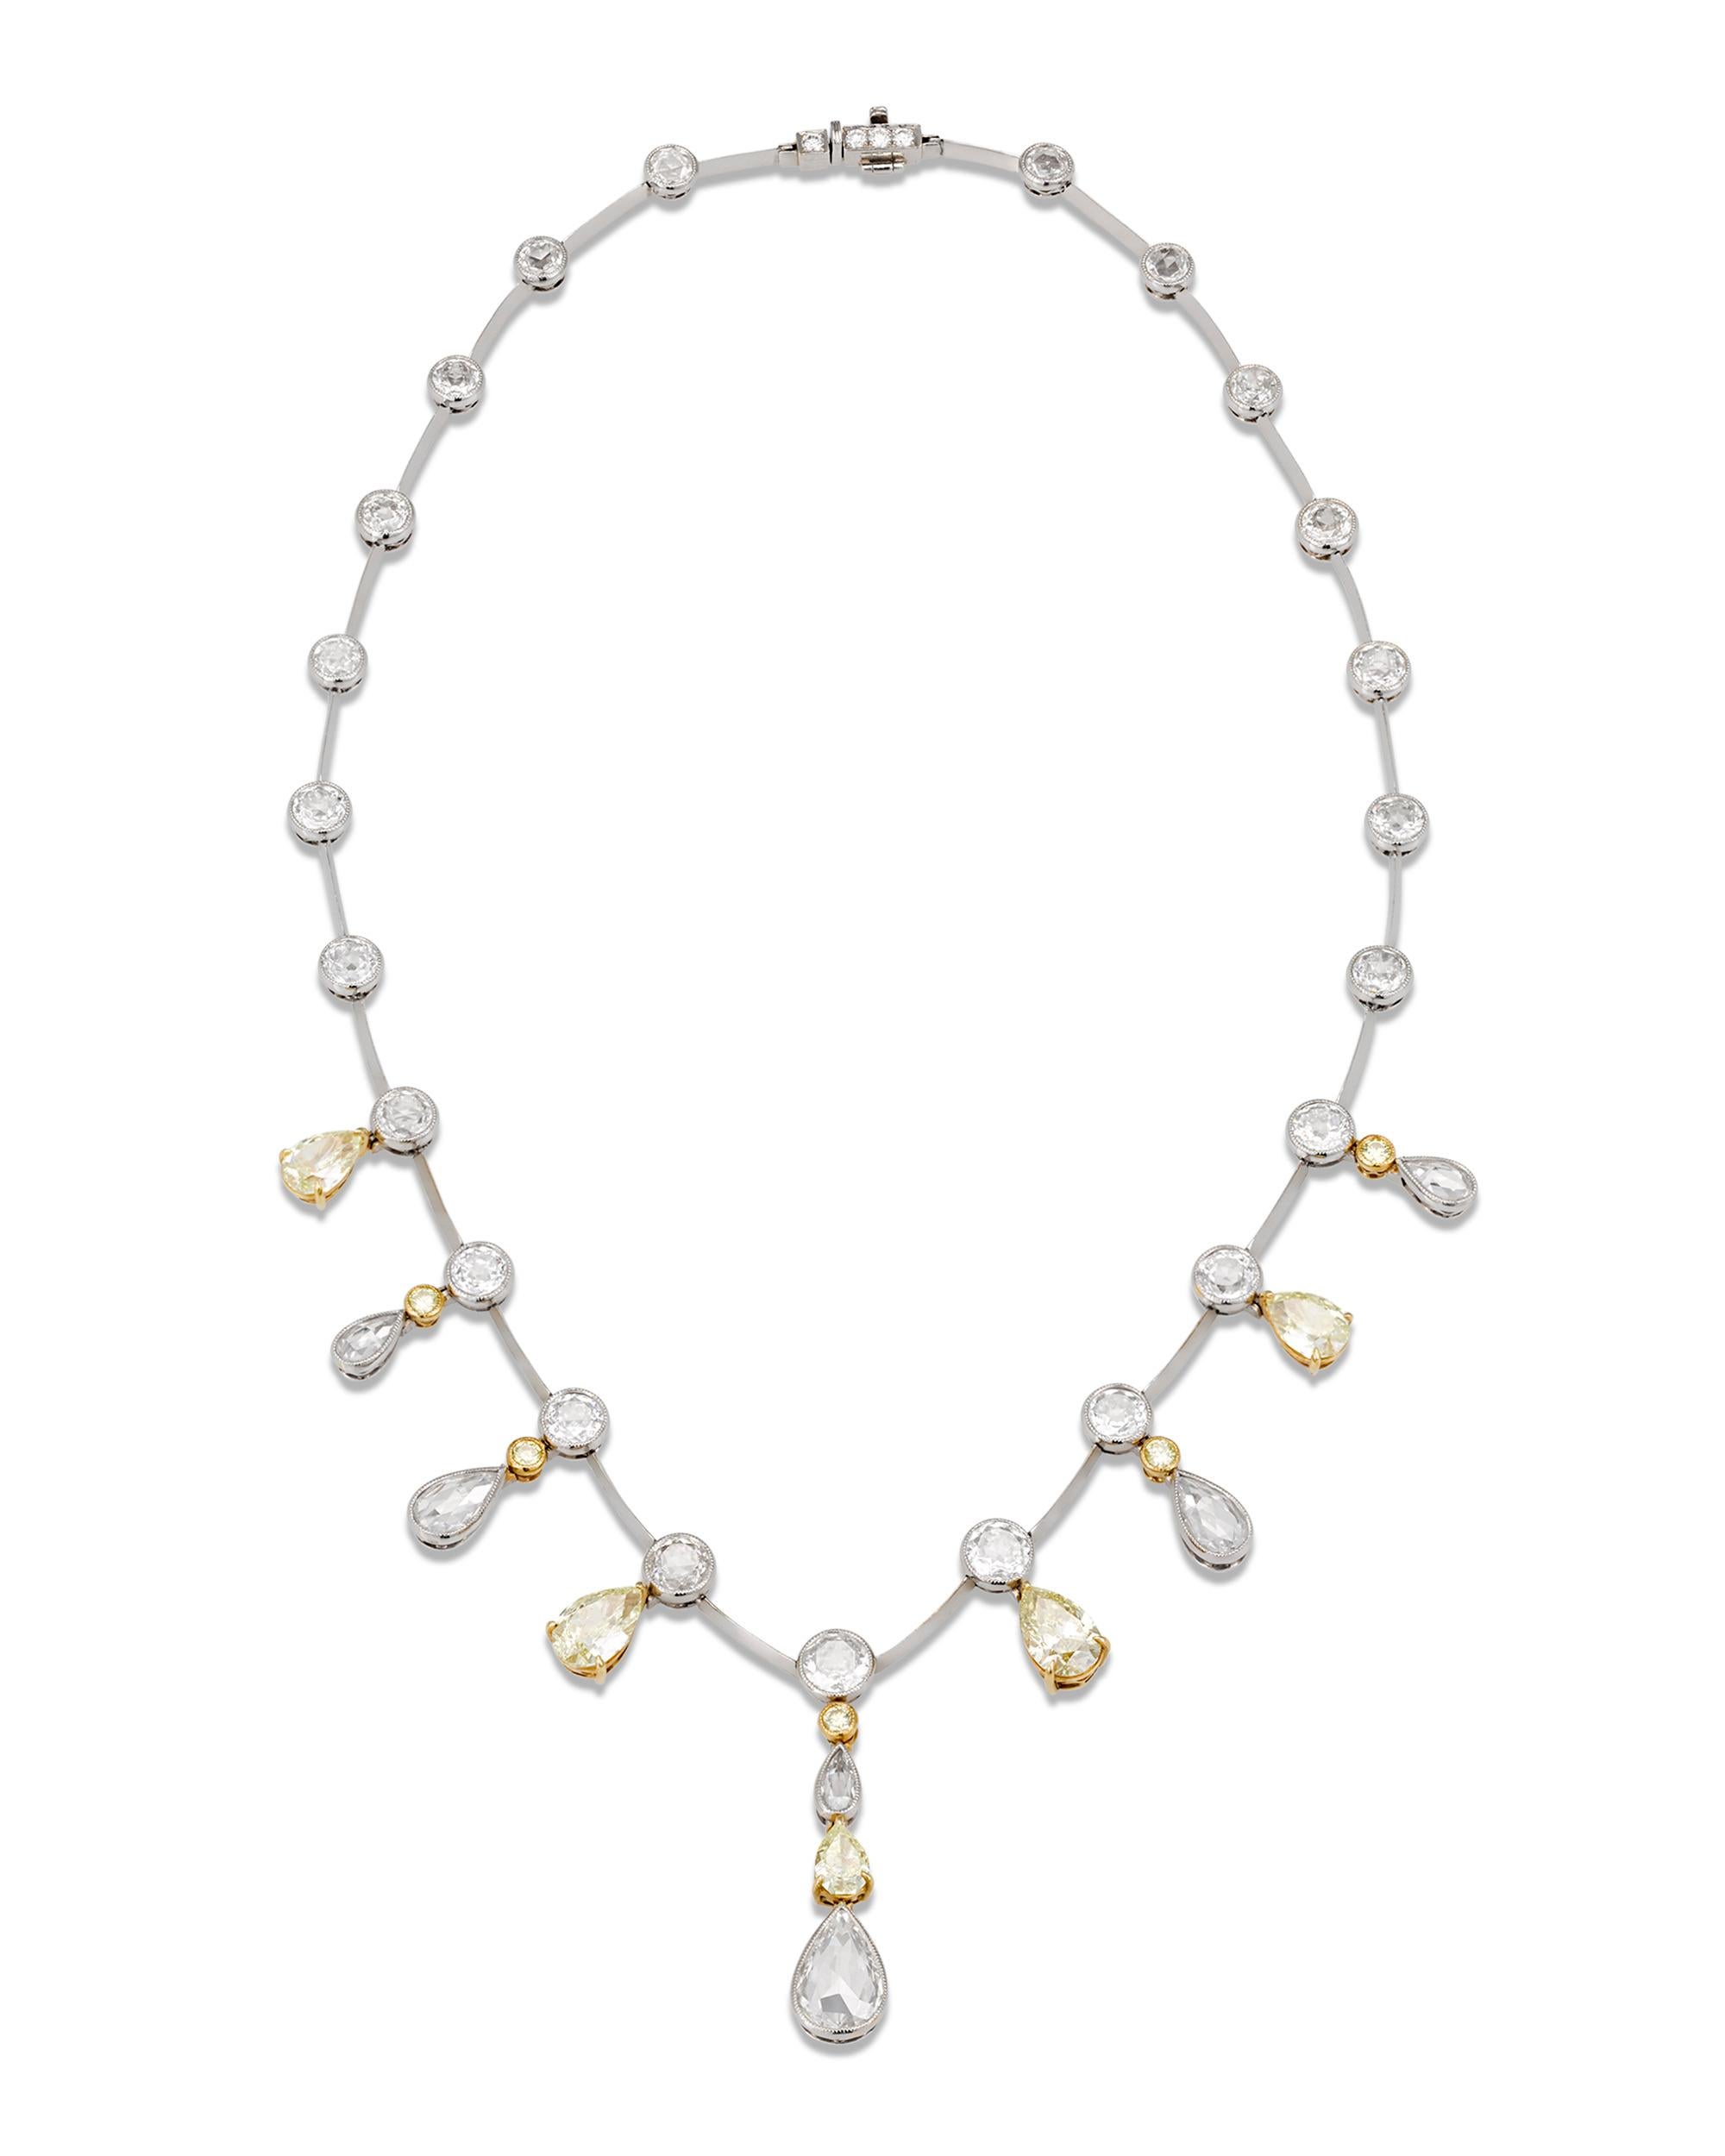 This sensational necklace showcases an exquisite design illuminated by extraordinary stones. Eleven dramatic pear-shaped fancy yellow and white diamonds dangle from bezel-set round brilliant-cut diamonds, gracefully falling around the neck. The